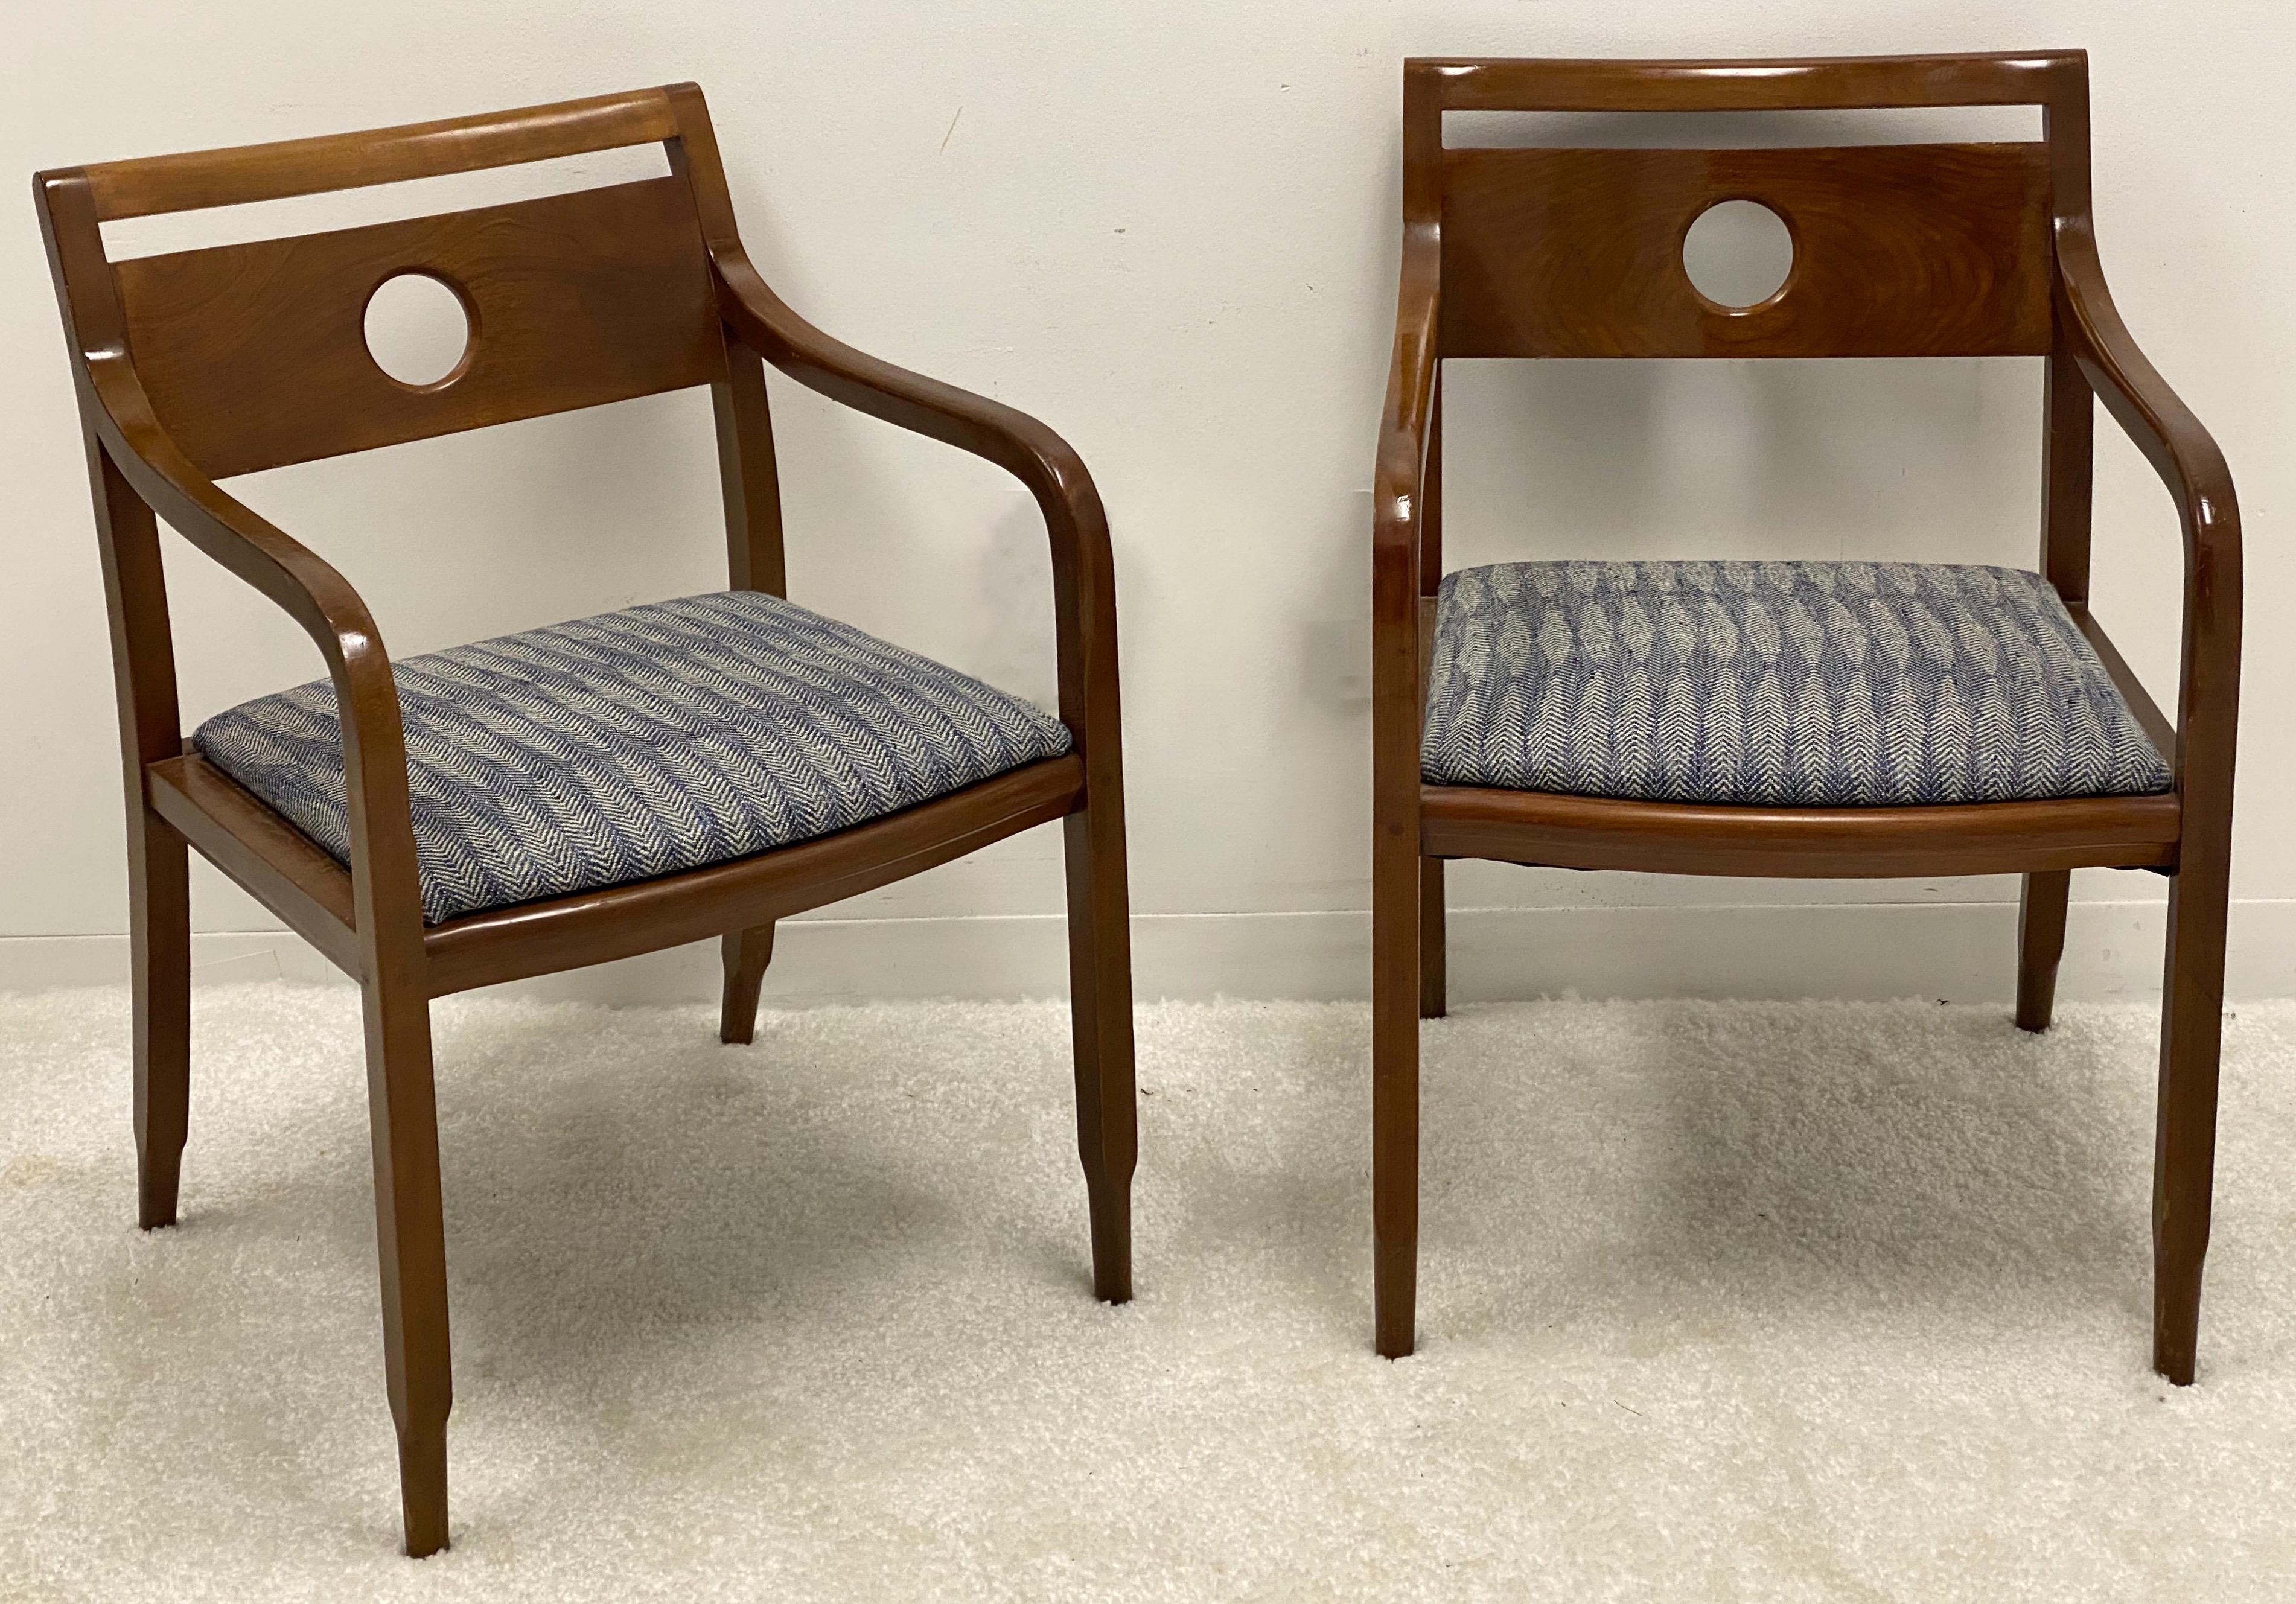 American Mid-Century Modern Mahogany Ward Bennett Bent Wood Arm Chairs, Pair For Sale